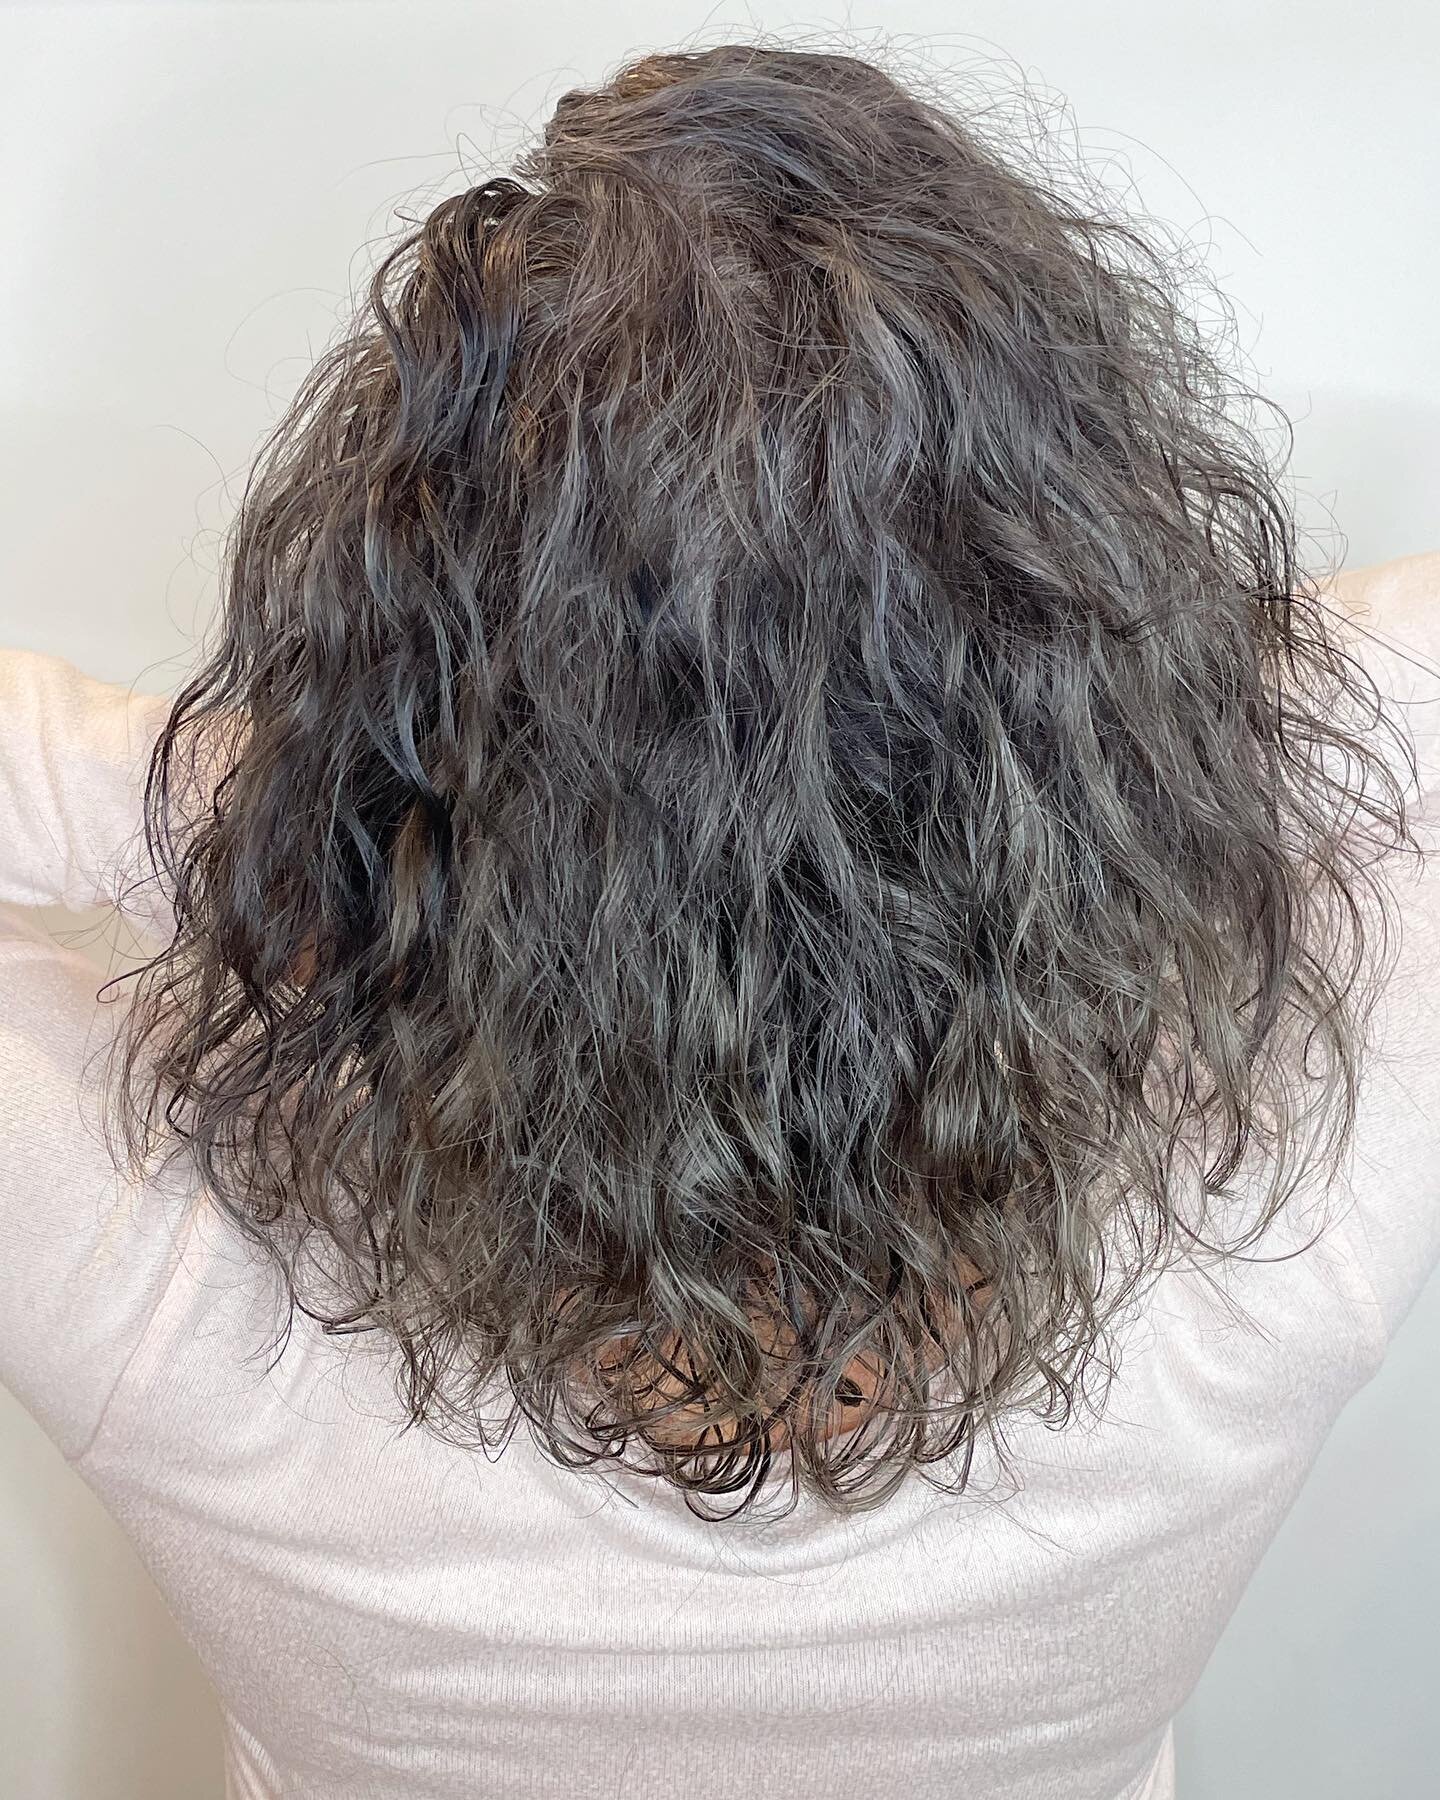 @celia.webs Her personality finally shows through with this grey transformation! Get your confidence back and embrace your natural beautiful self, all while not compromising the hair health. She left feeling softer and more free.
With the help of @di